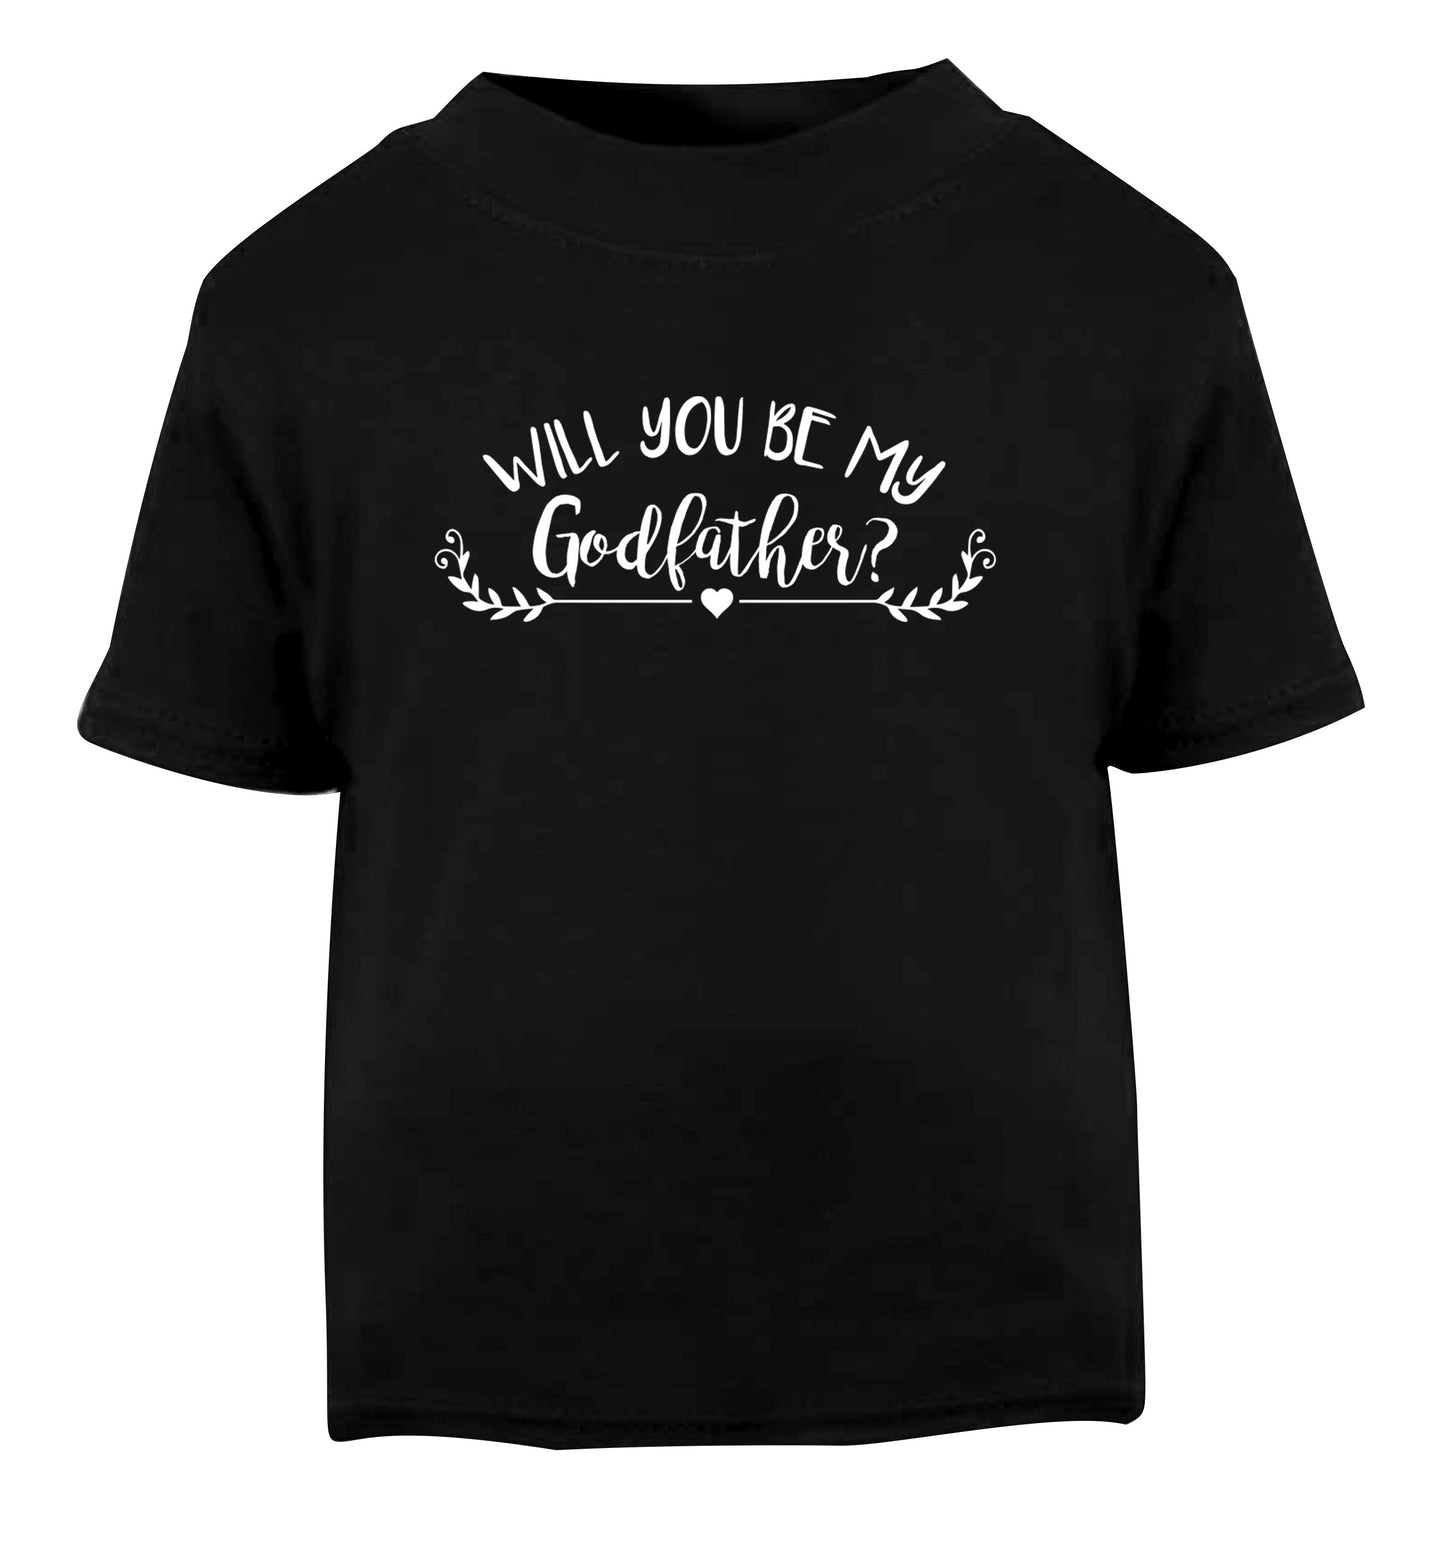 Will you be my godfather? Black Baby Toddler Tshirt 2 years